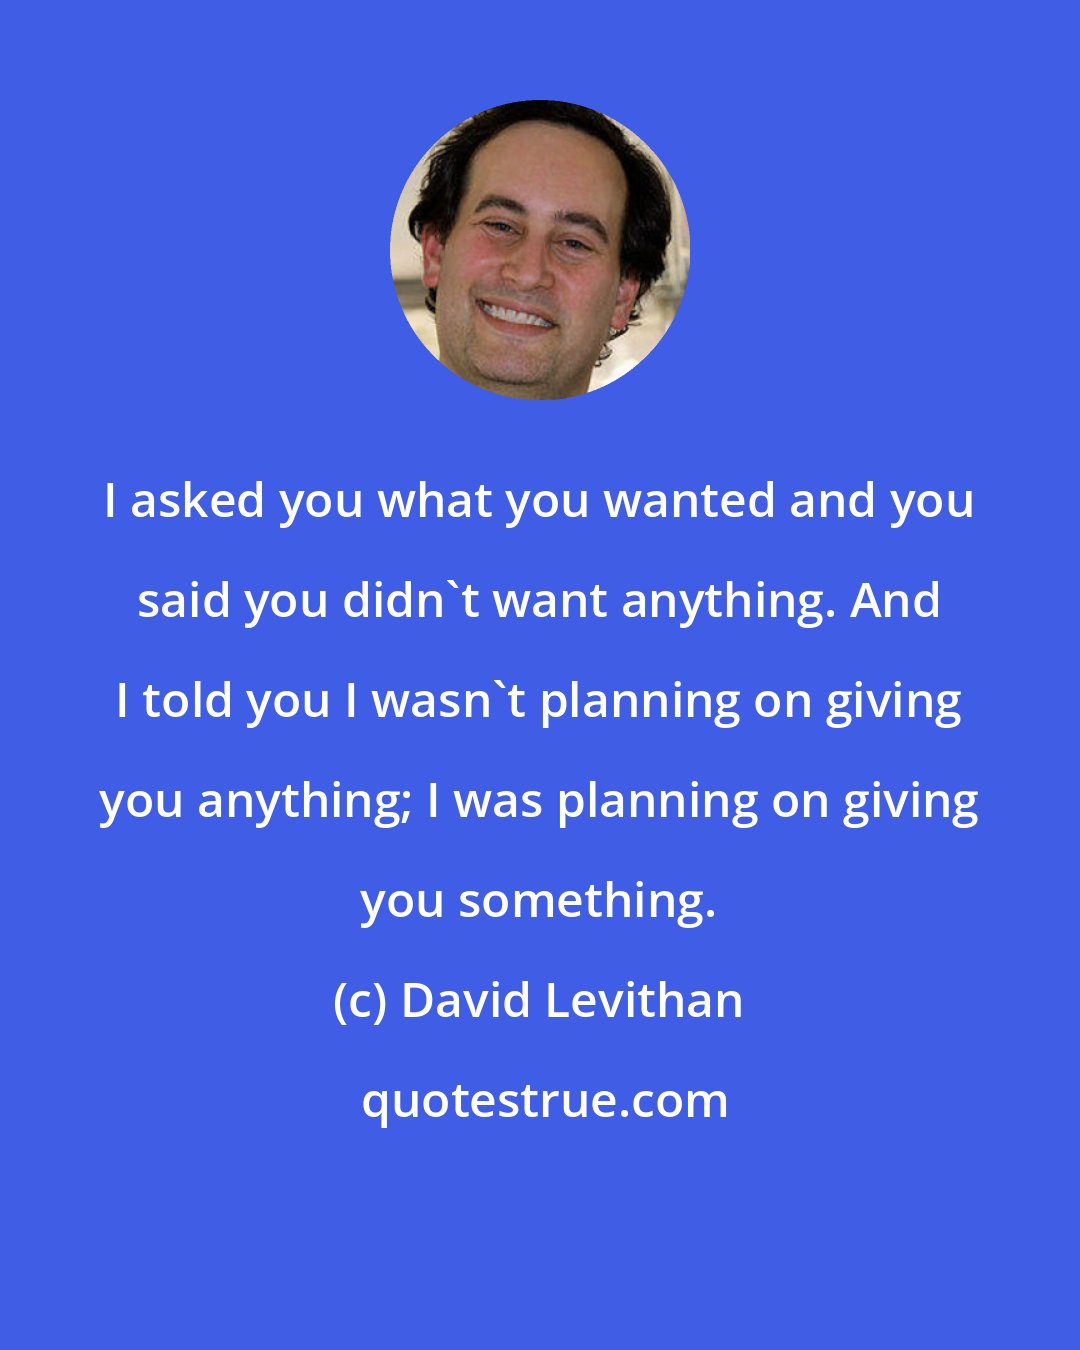 David Levithan: I asked you what you wanted and you said you didn't want anything. And I told you I wasn't planning on giving you anything; I was planning on giving you something.